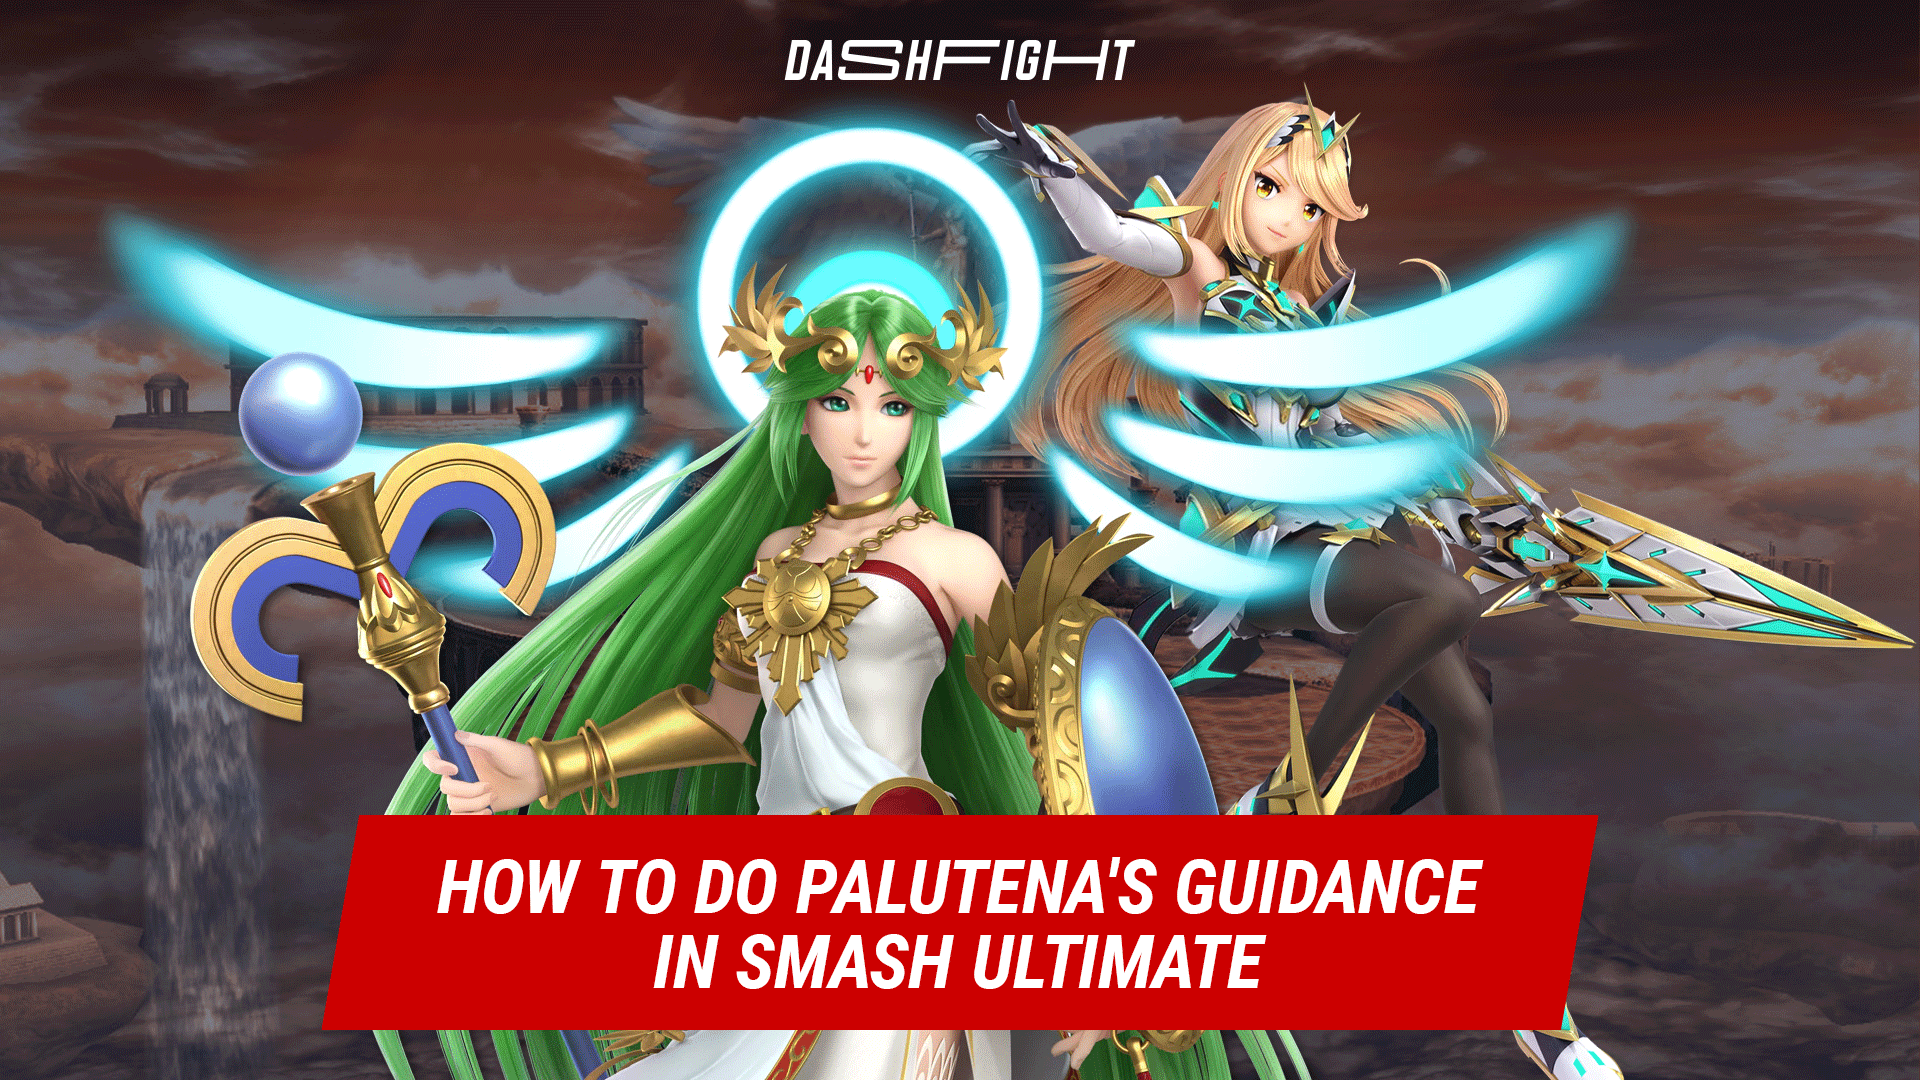 How To Do Palutena's Guidance in Smash Ultimate